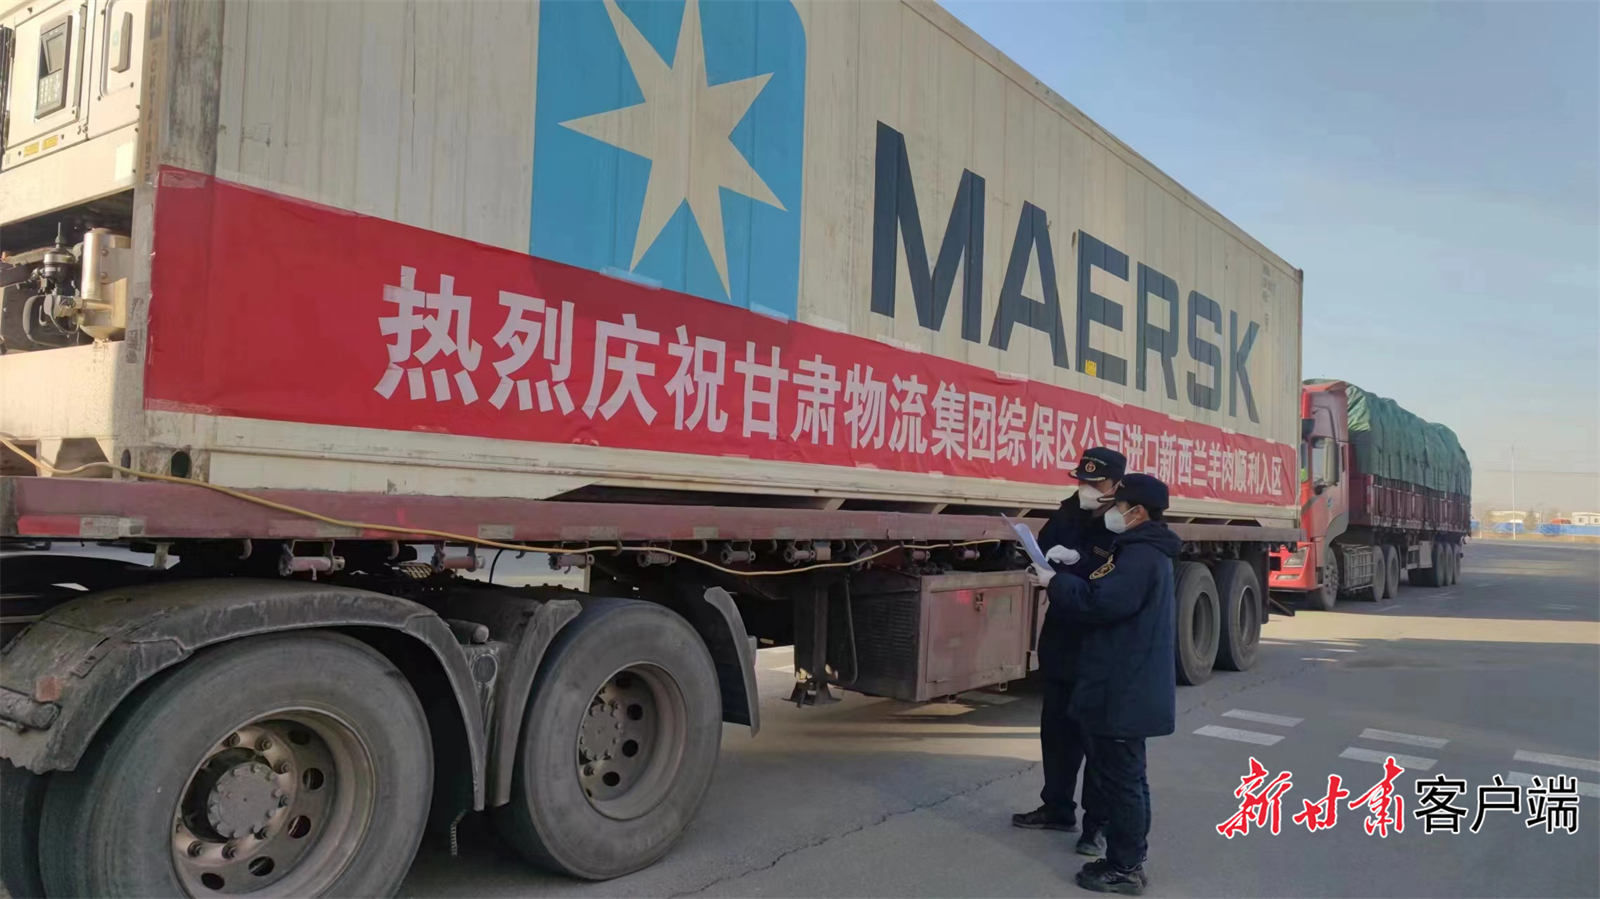 For the first time exported to Gansu, this kind of toxic and flammable chemicals in Gansu are going abroad